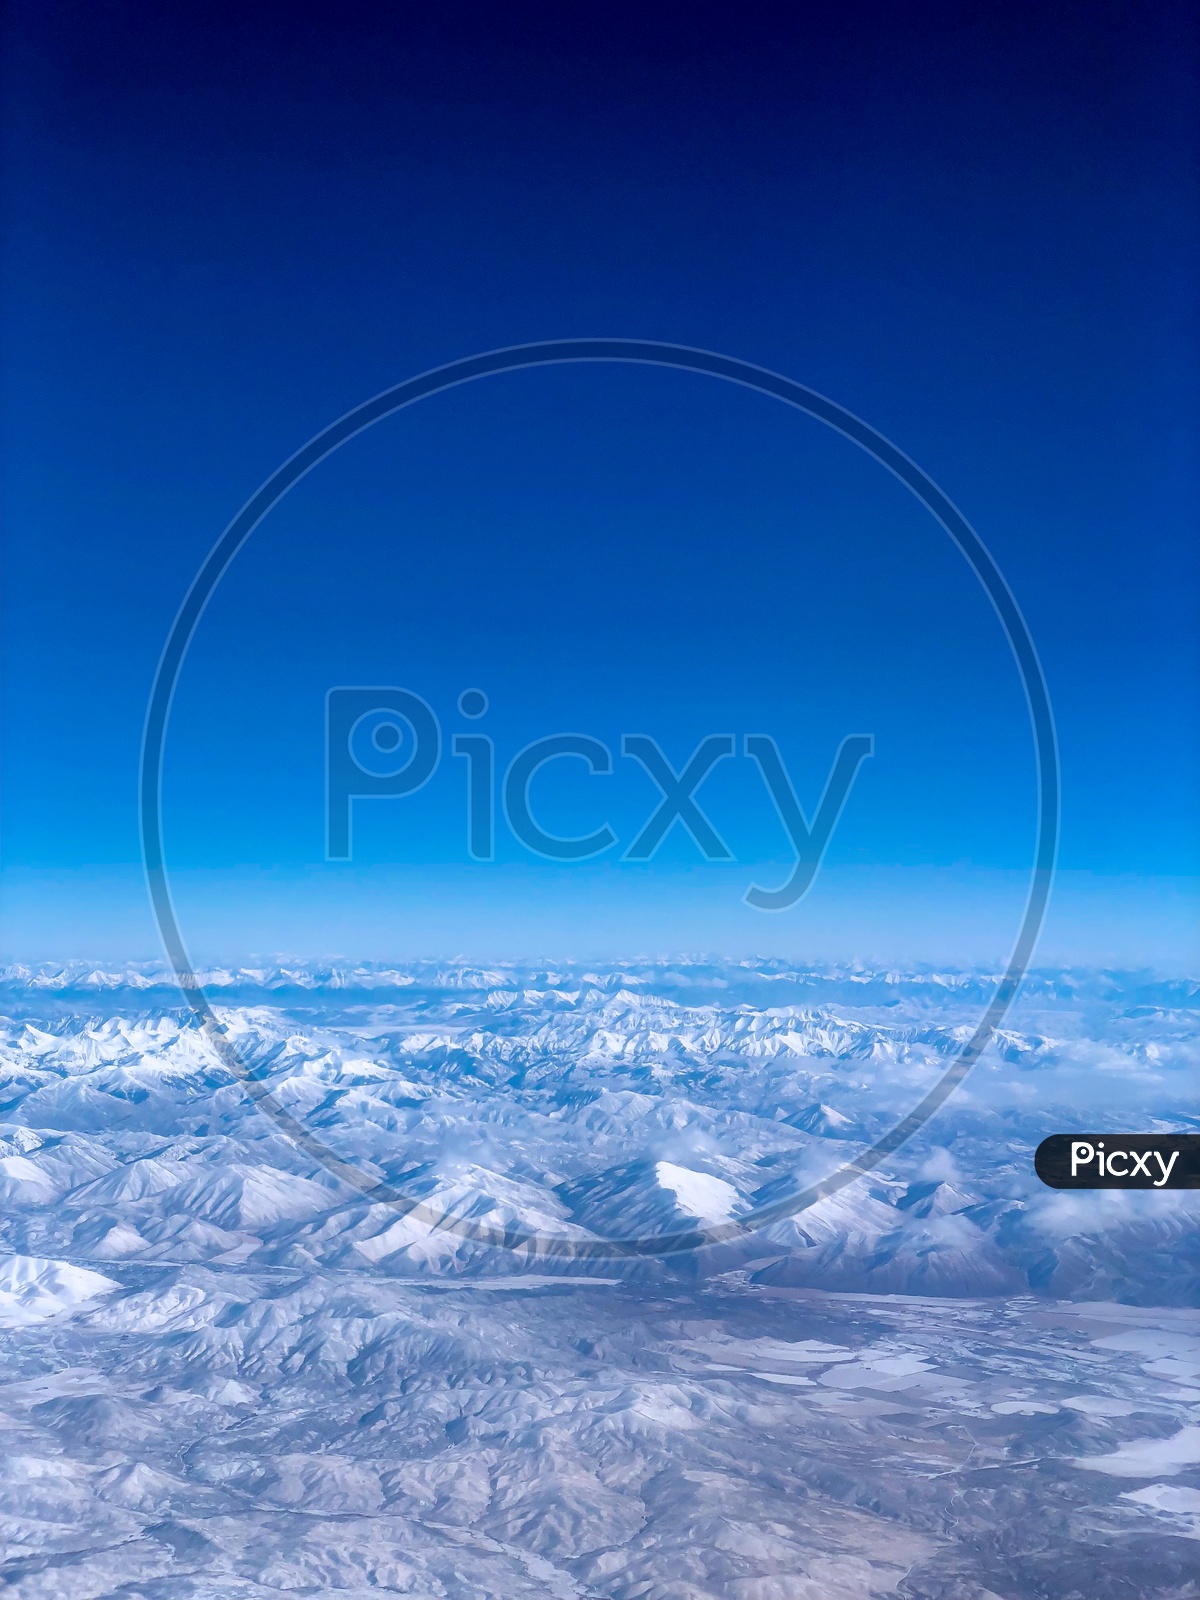 Ariel View of Snow Capped Mountains & Blue Sky